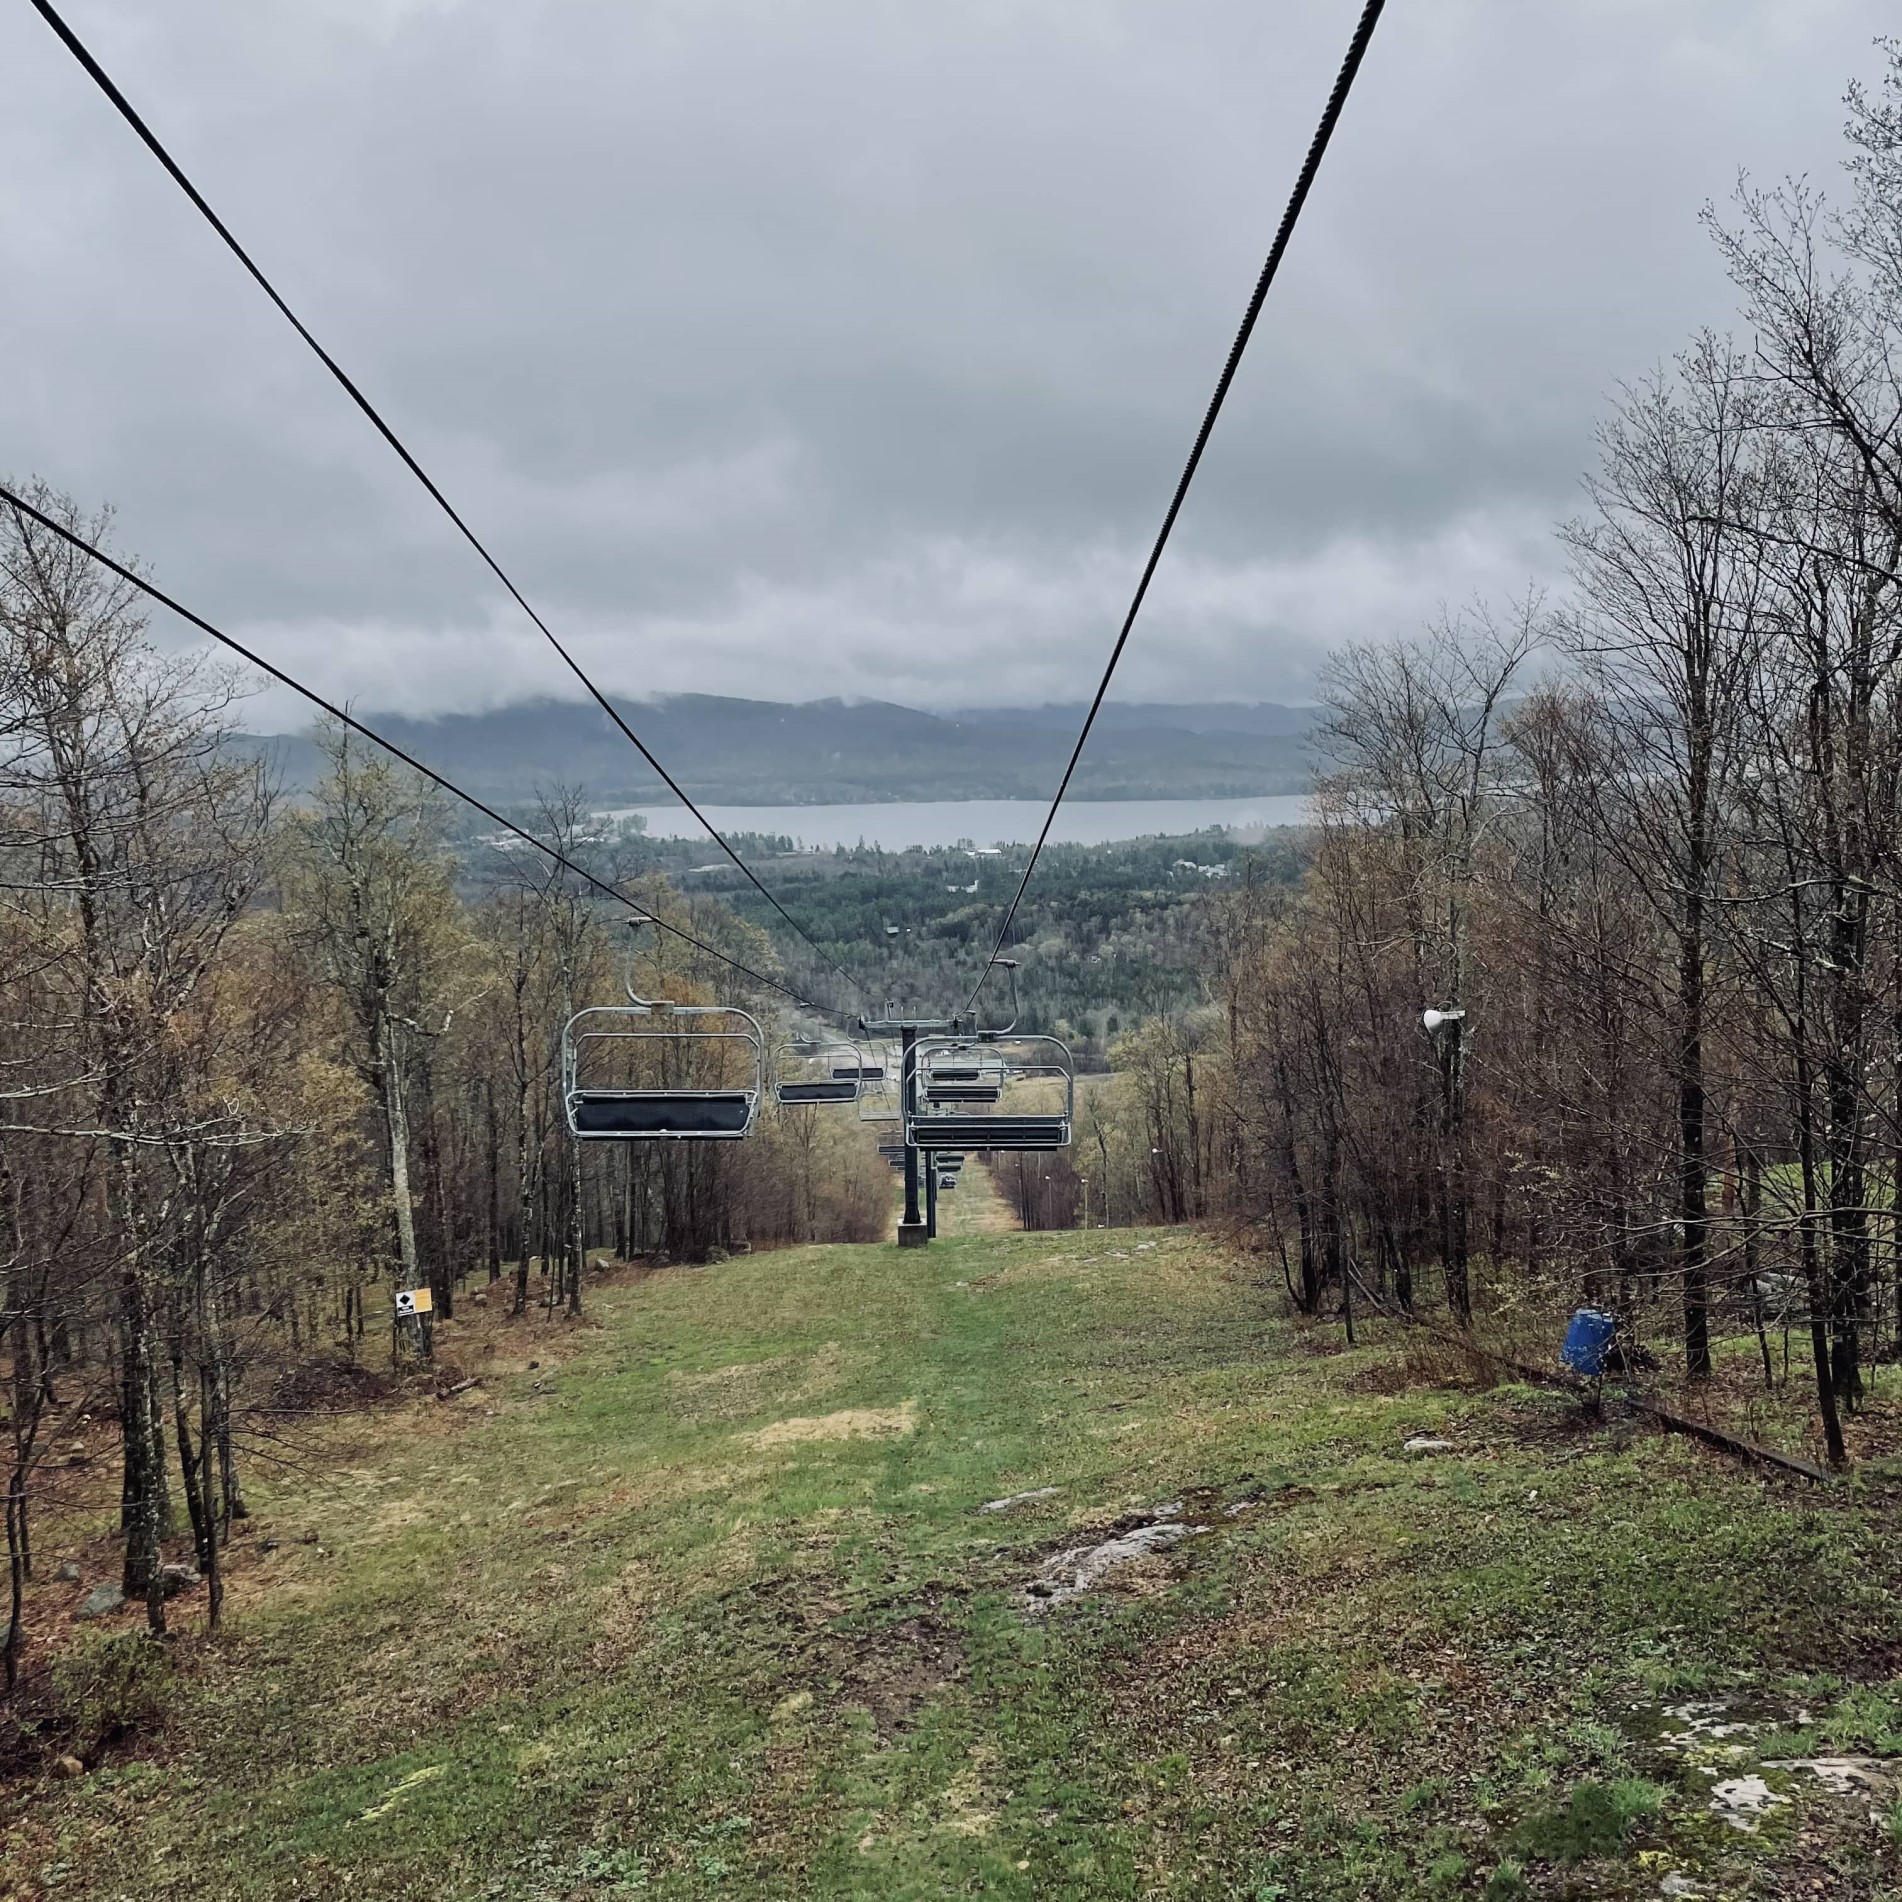 going down ski lift in early spring